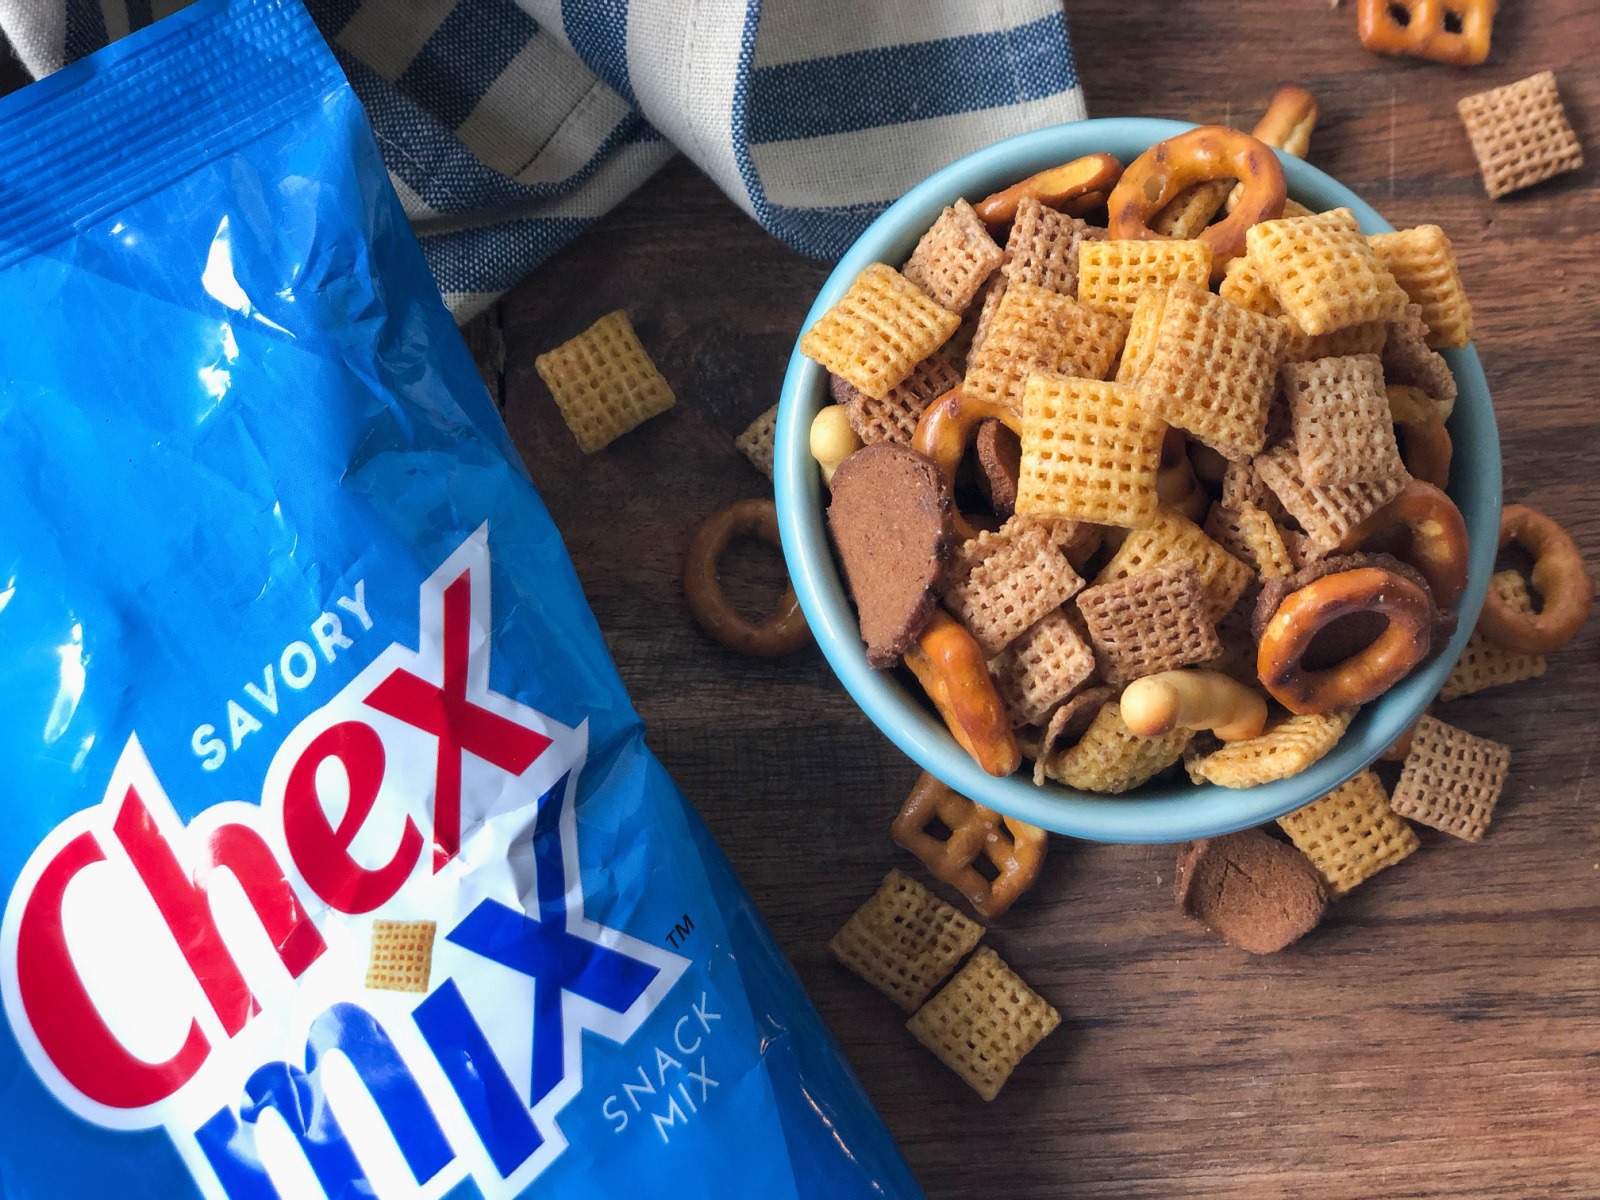 Get Chex Mix For As Little As $1.27 Per Bag At Publix